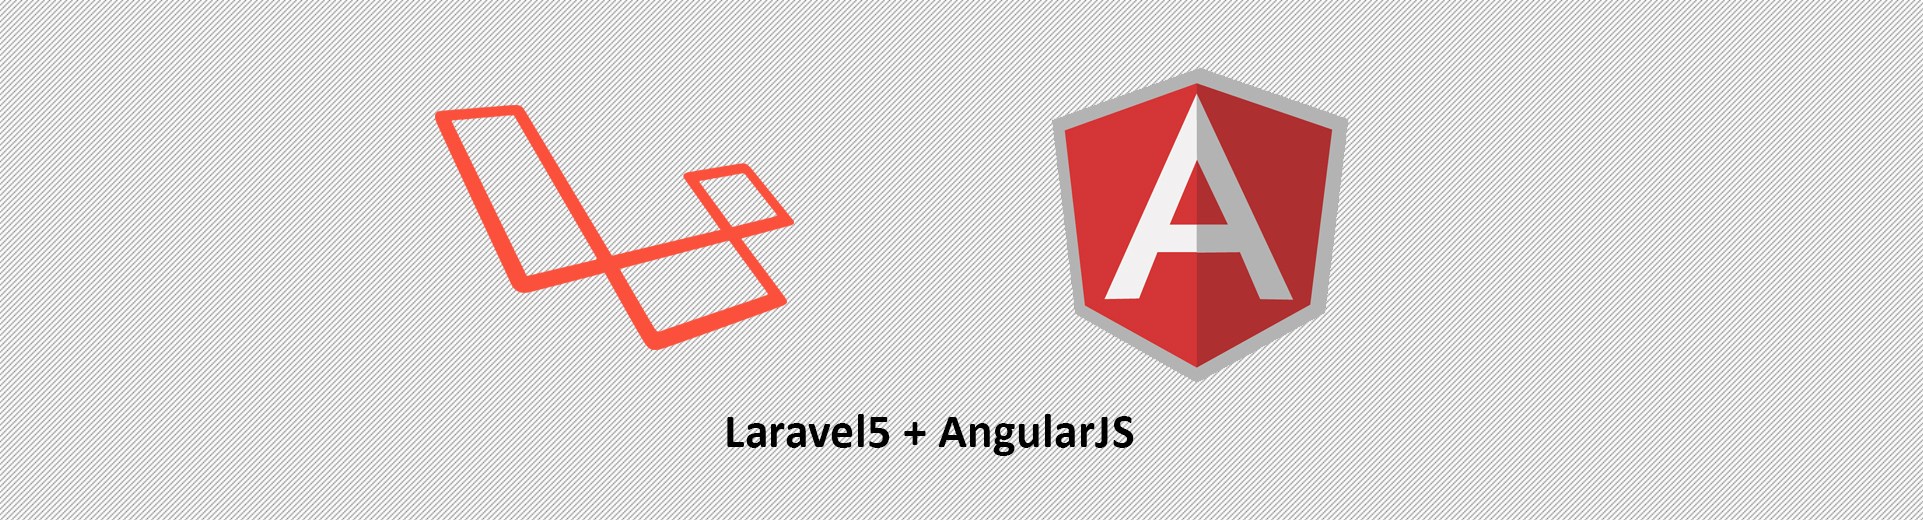 Build an app with Laravel5 (backend) and Angularjs (frontend) – Part 2